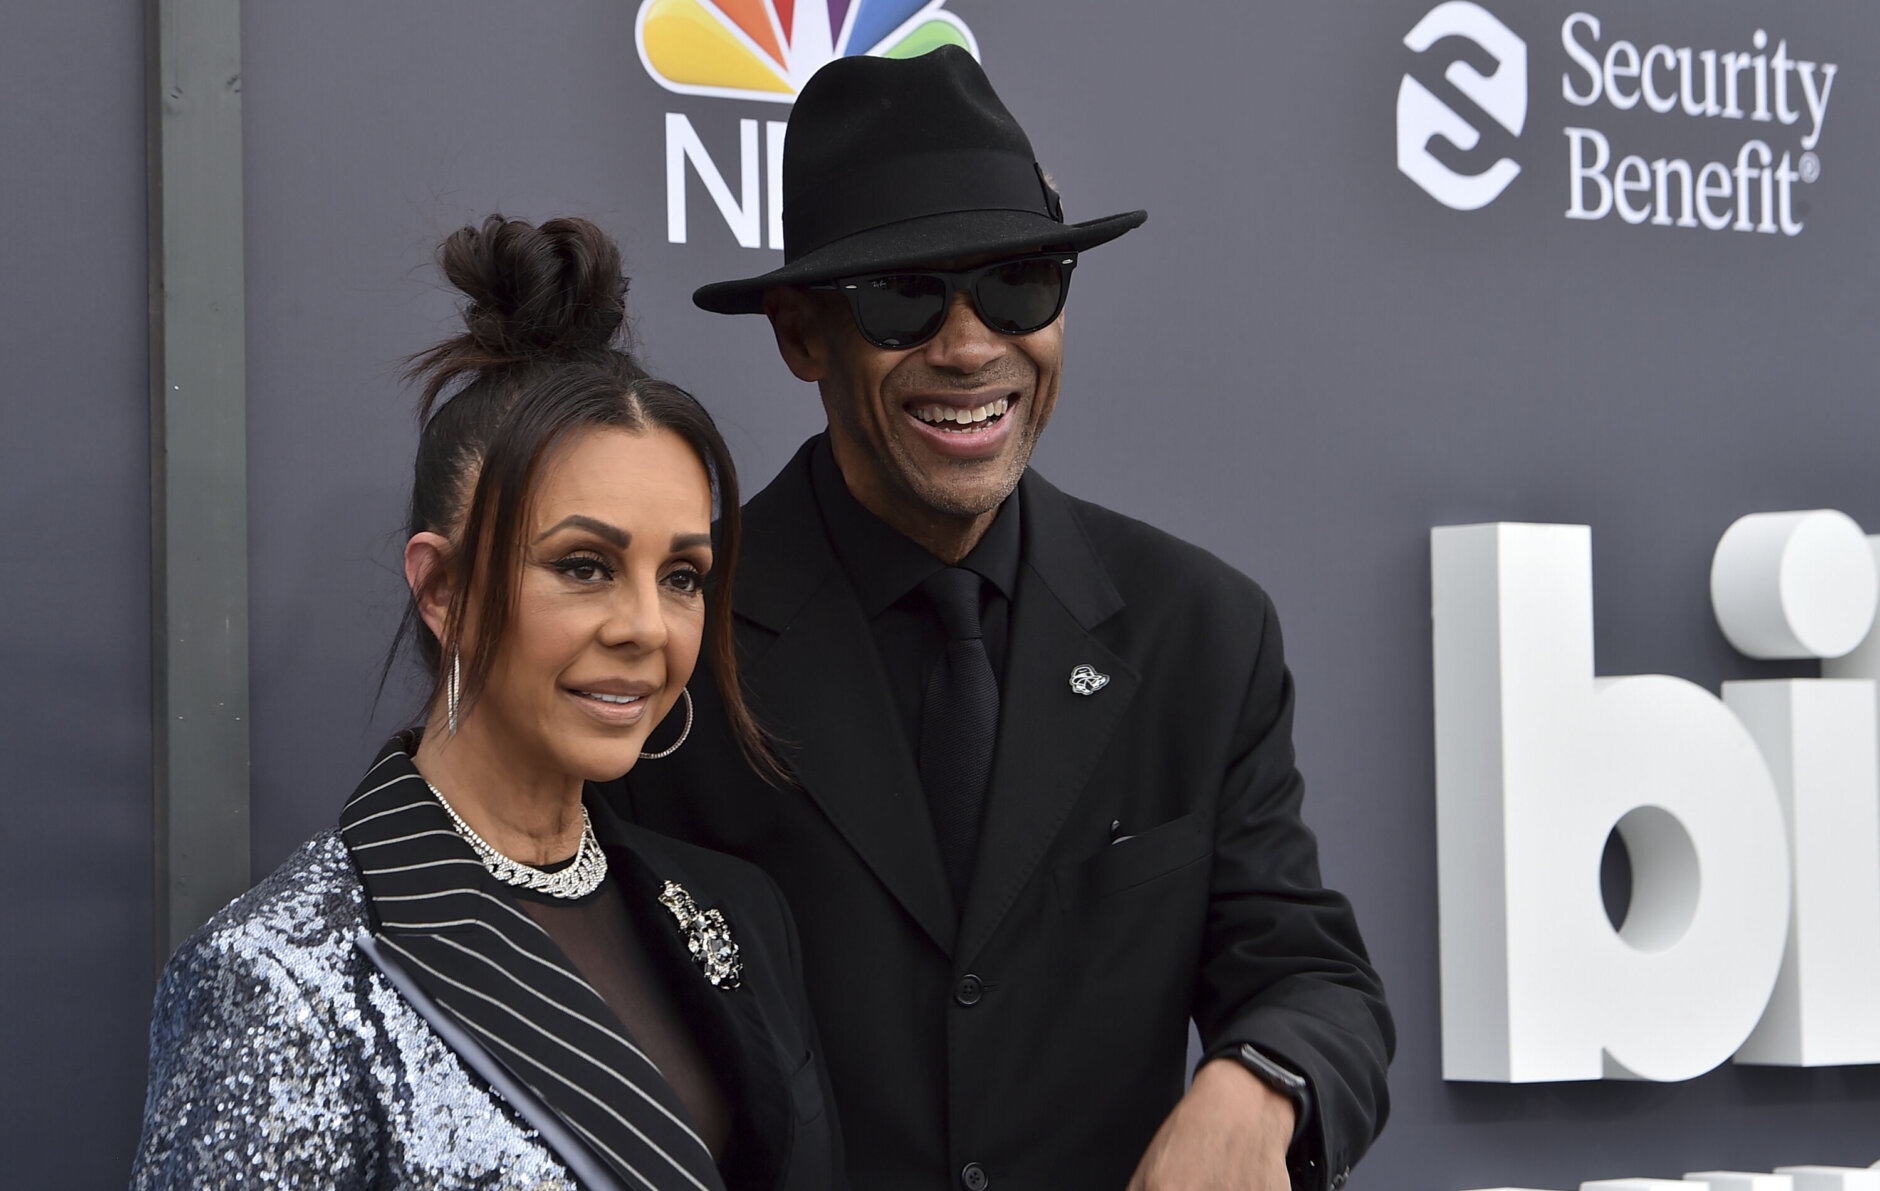 Lisa Padilla, left, and Jimmy Jam arrive at the Billboard Music Awards on Sunday, May 15, 2022, at the MGM Grand Garden Arena in Las Vegas. (Photo by Jordan Strauss/Invision/AP)